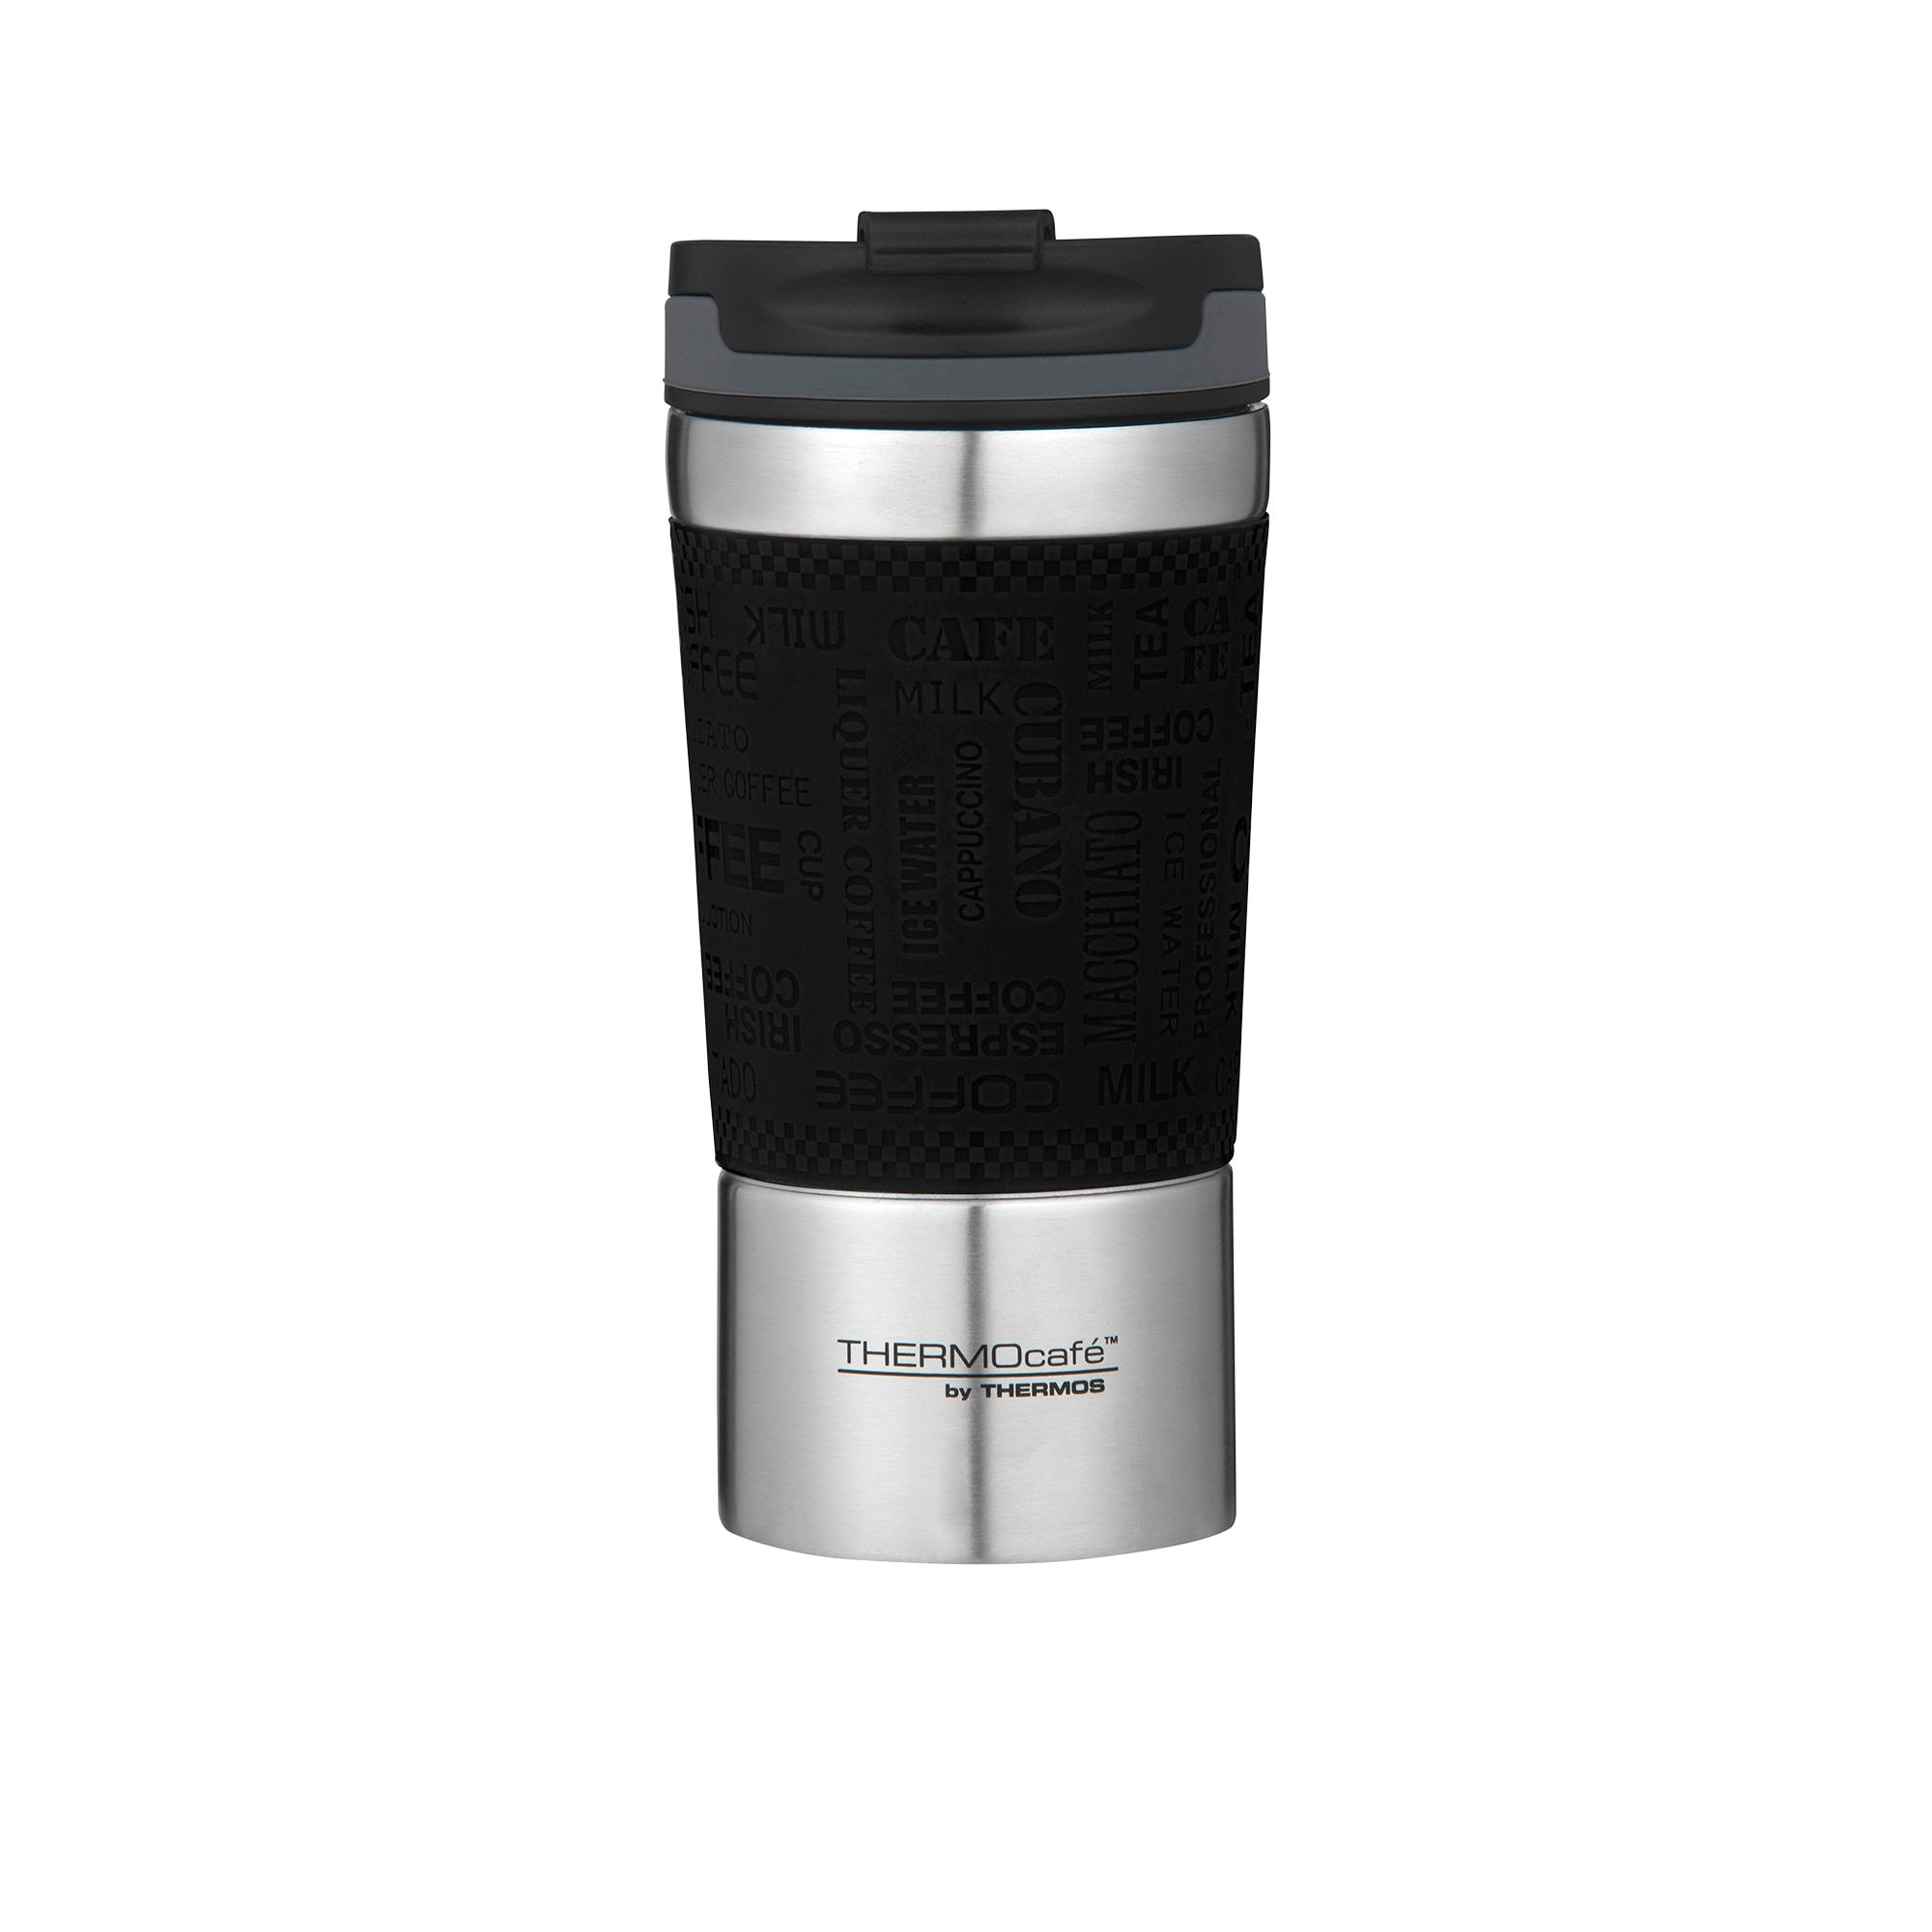 Thermos Thermocafe Insulated Travel Cup 350ml Black Image 1